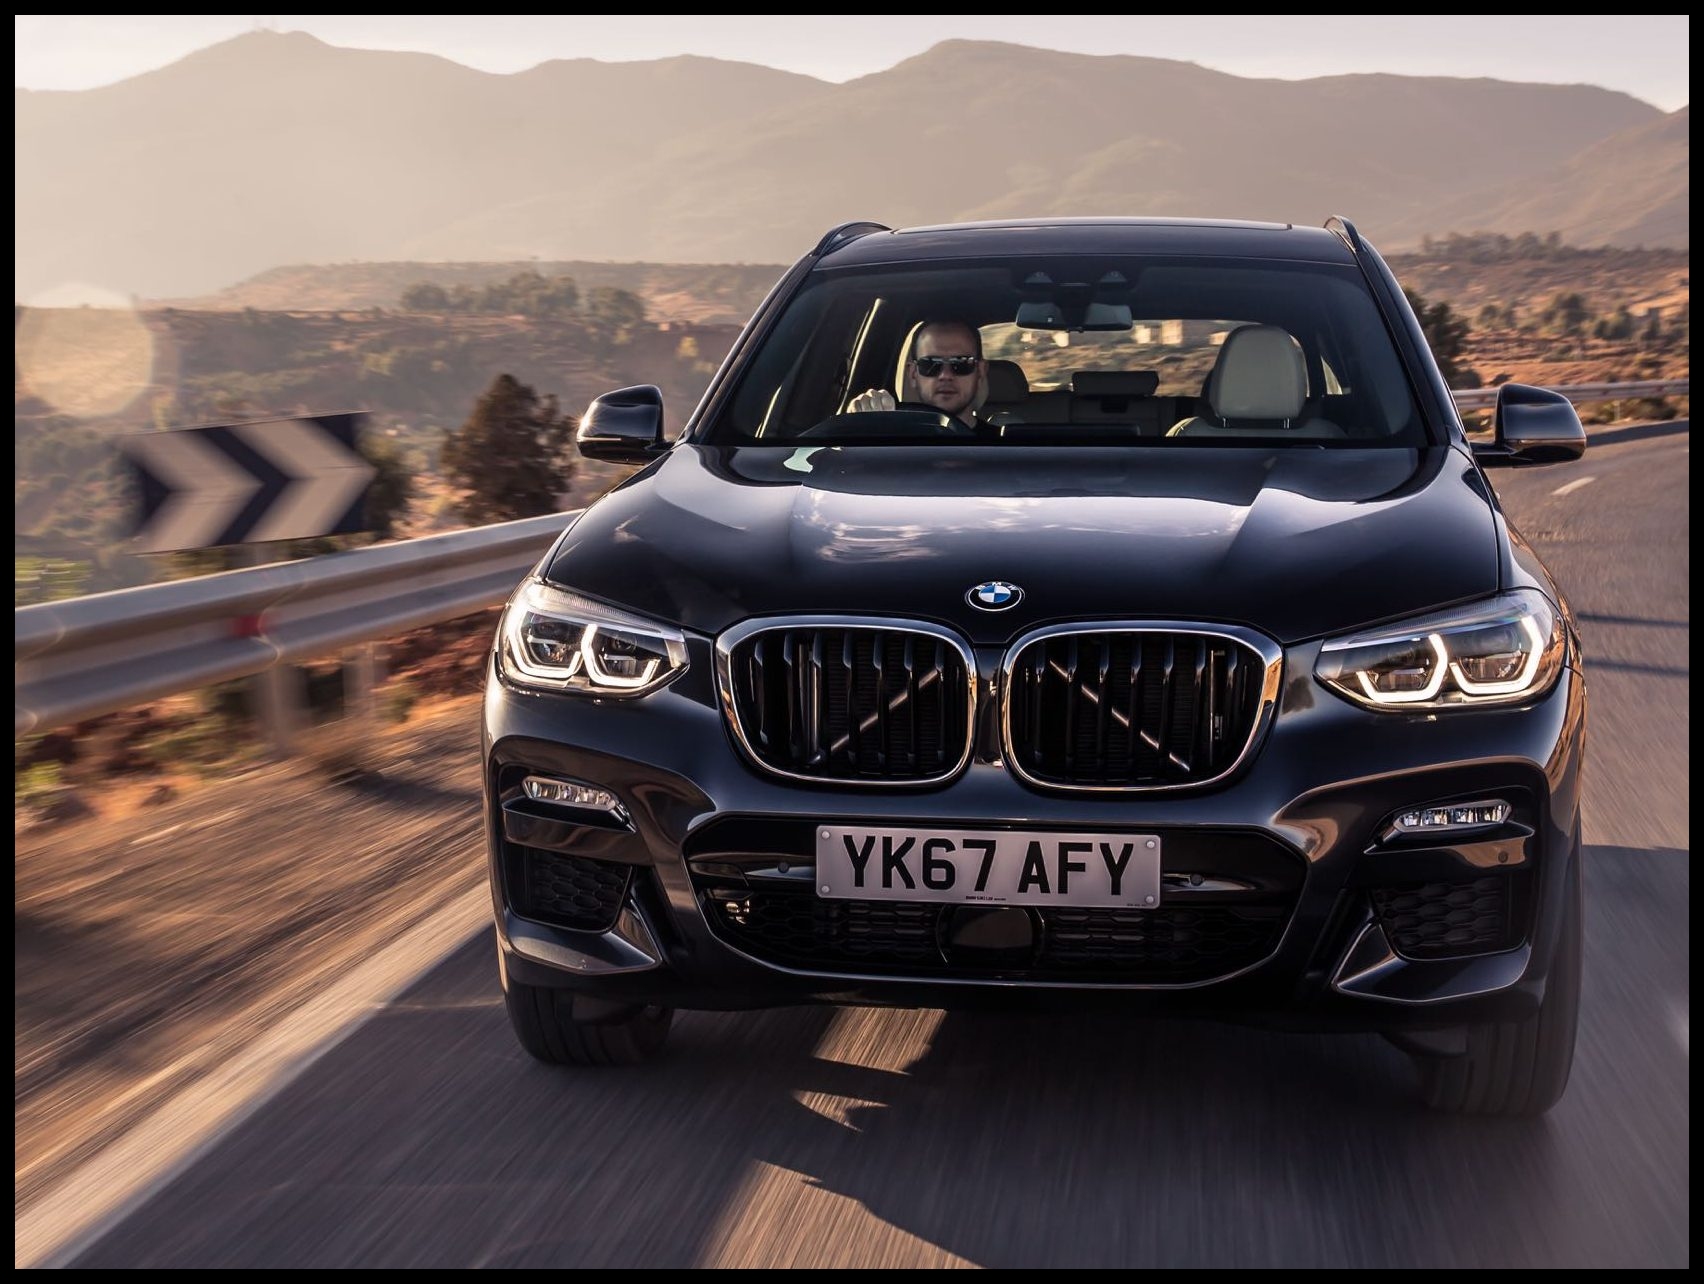 The BMW X3 has history and enduring desirability on its side in the immensely popular SUV sector which shows no sign of contracting but continues to expand